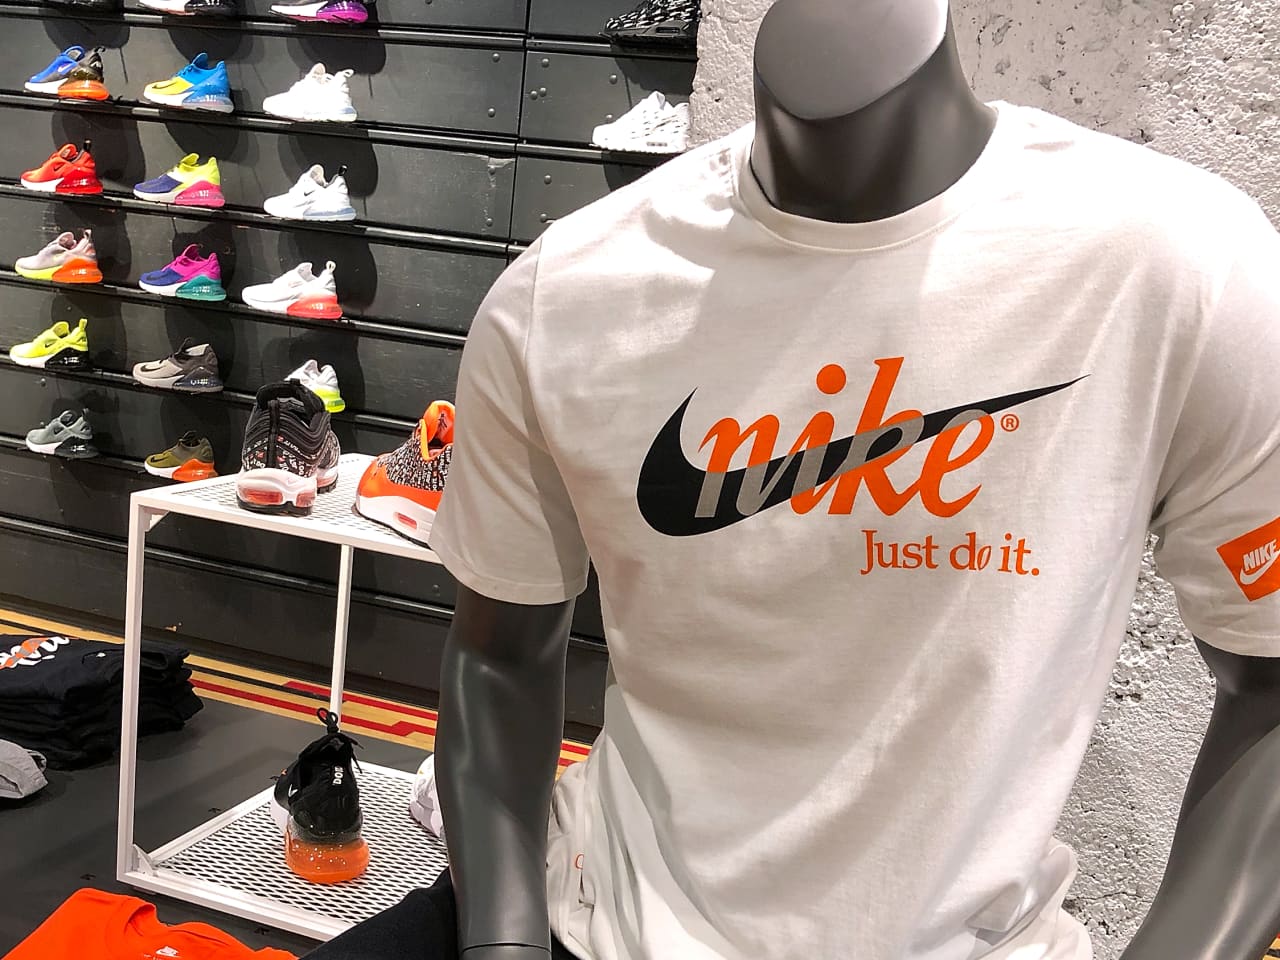 Nike manufacturing in Vietnam grinds a halt due to COVID-19, creating another chain challenge - MarketWatch